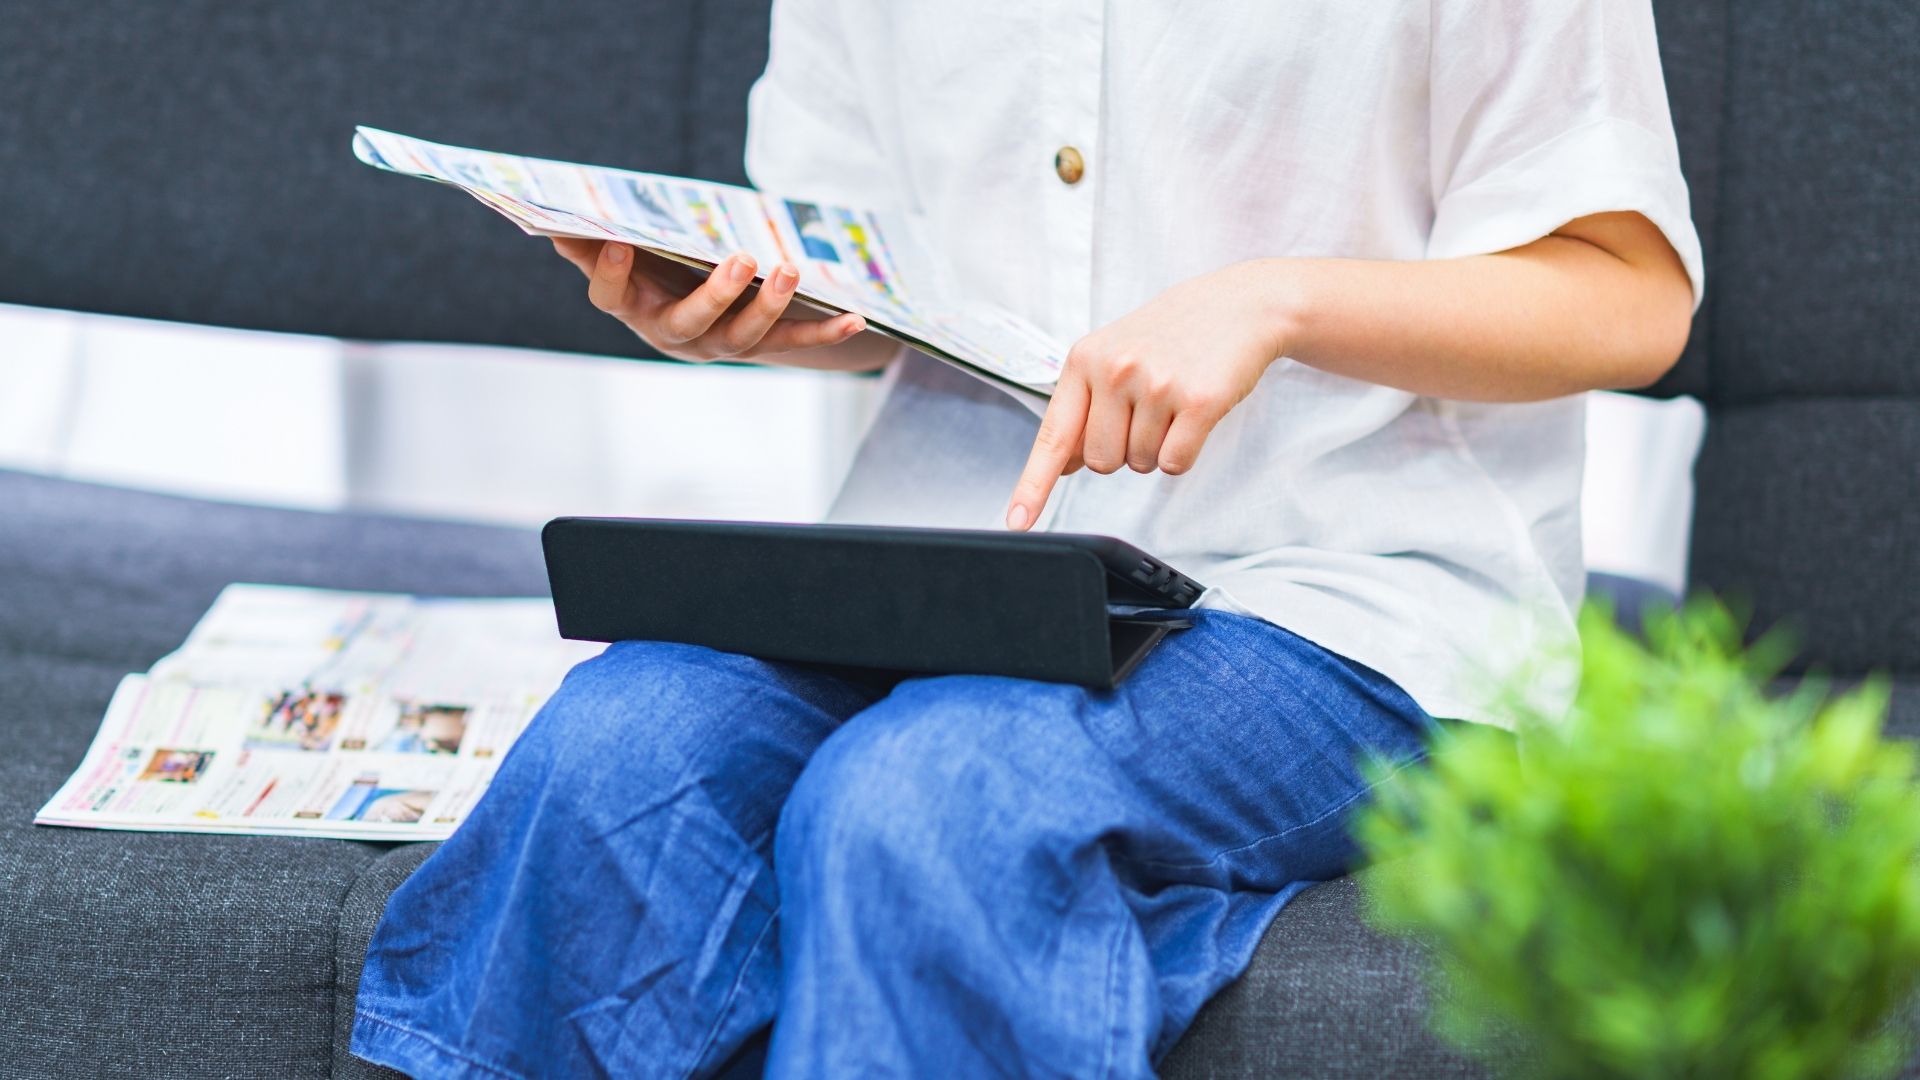 A woman wearing a white shirt with long jean pants is searching for relevant keywords through a black ipad and with a source from a fashion magazine.